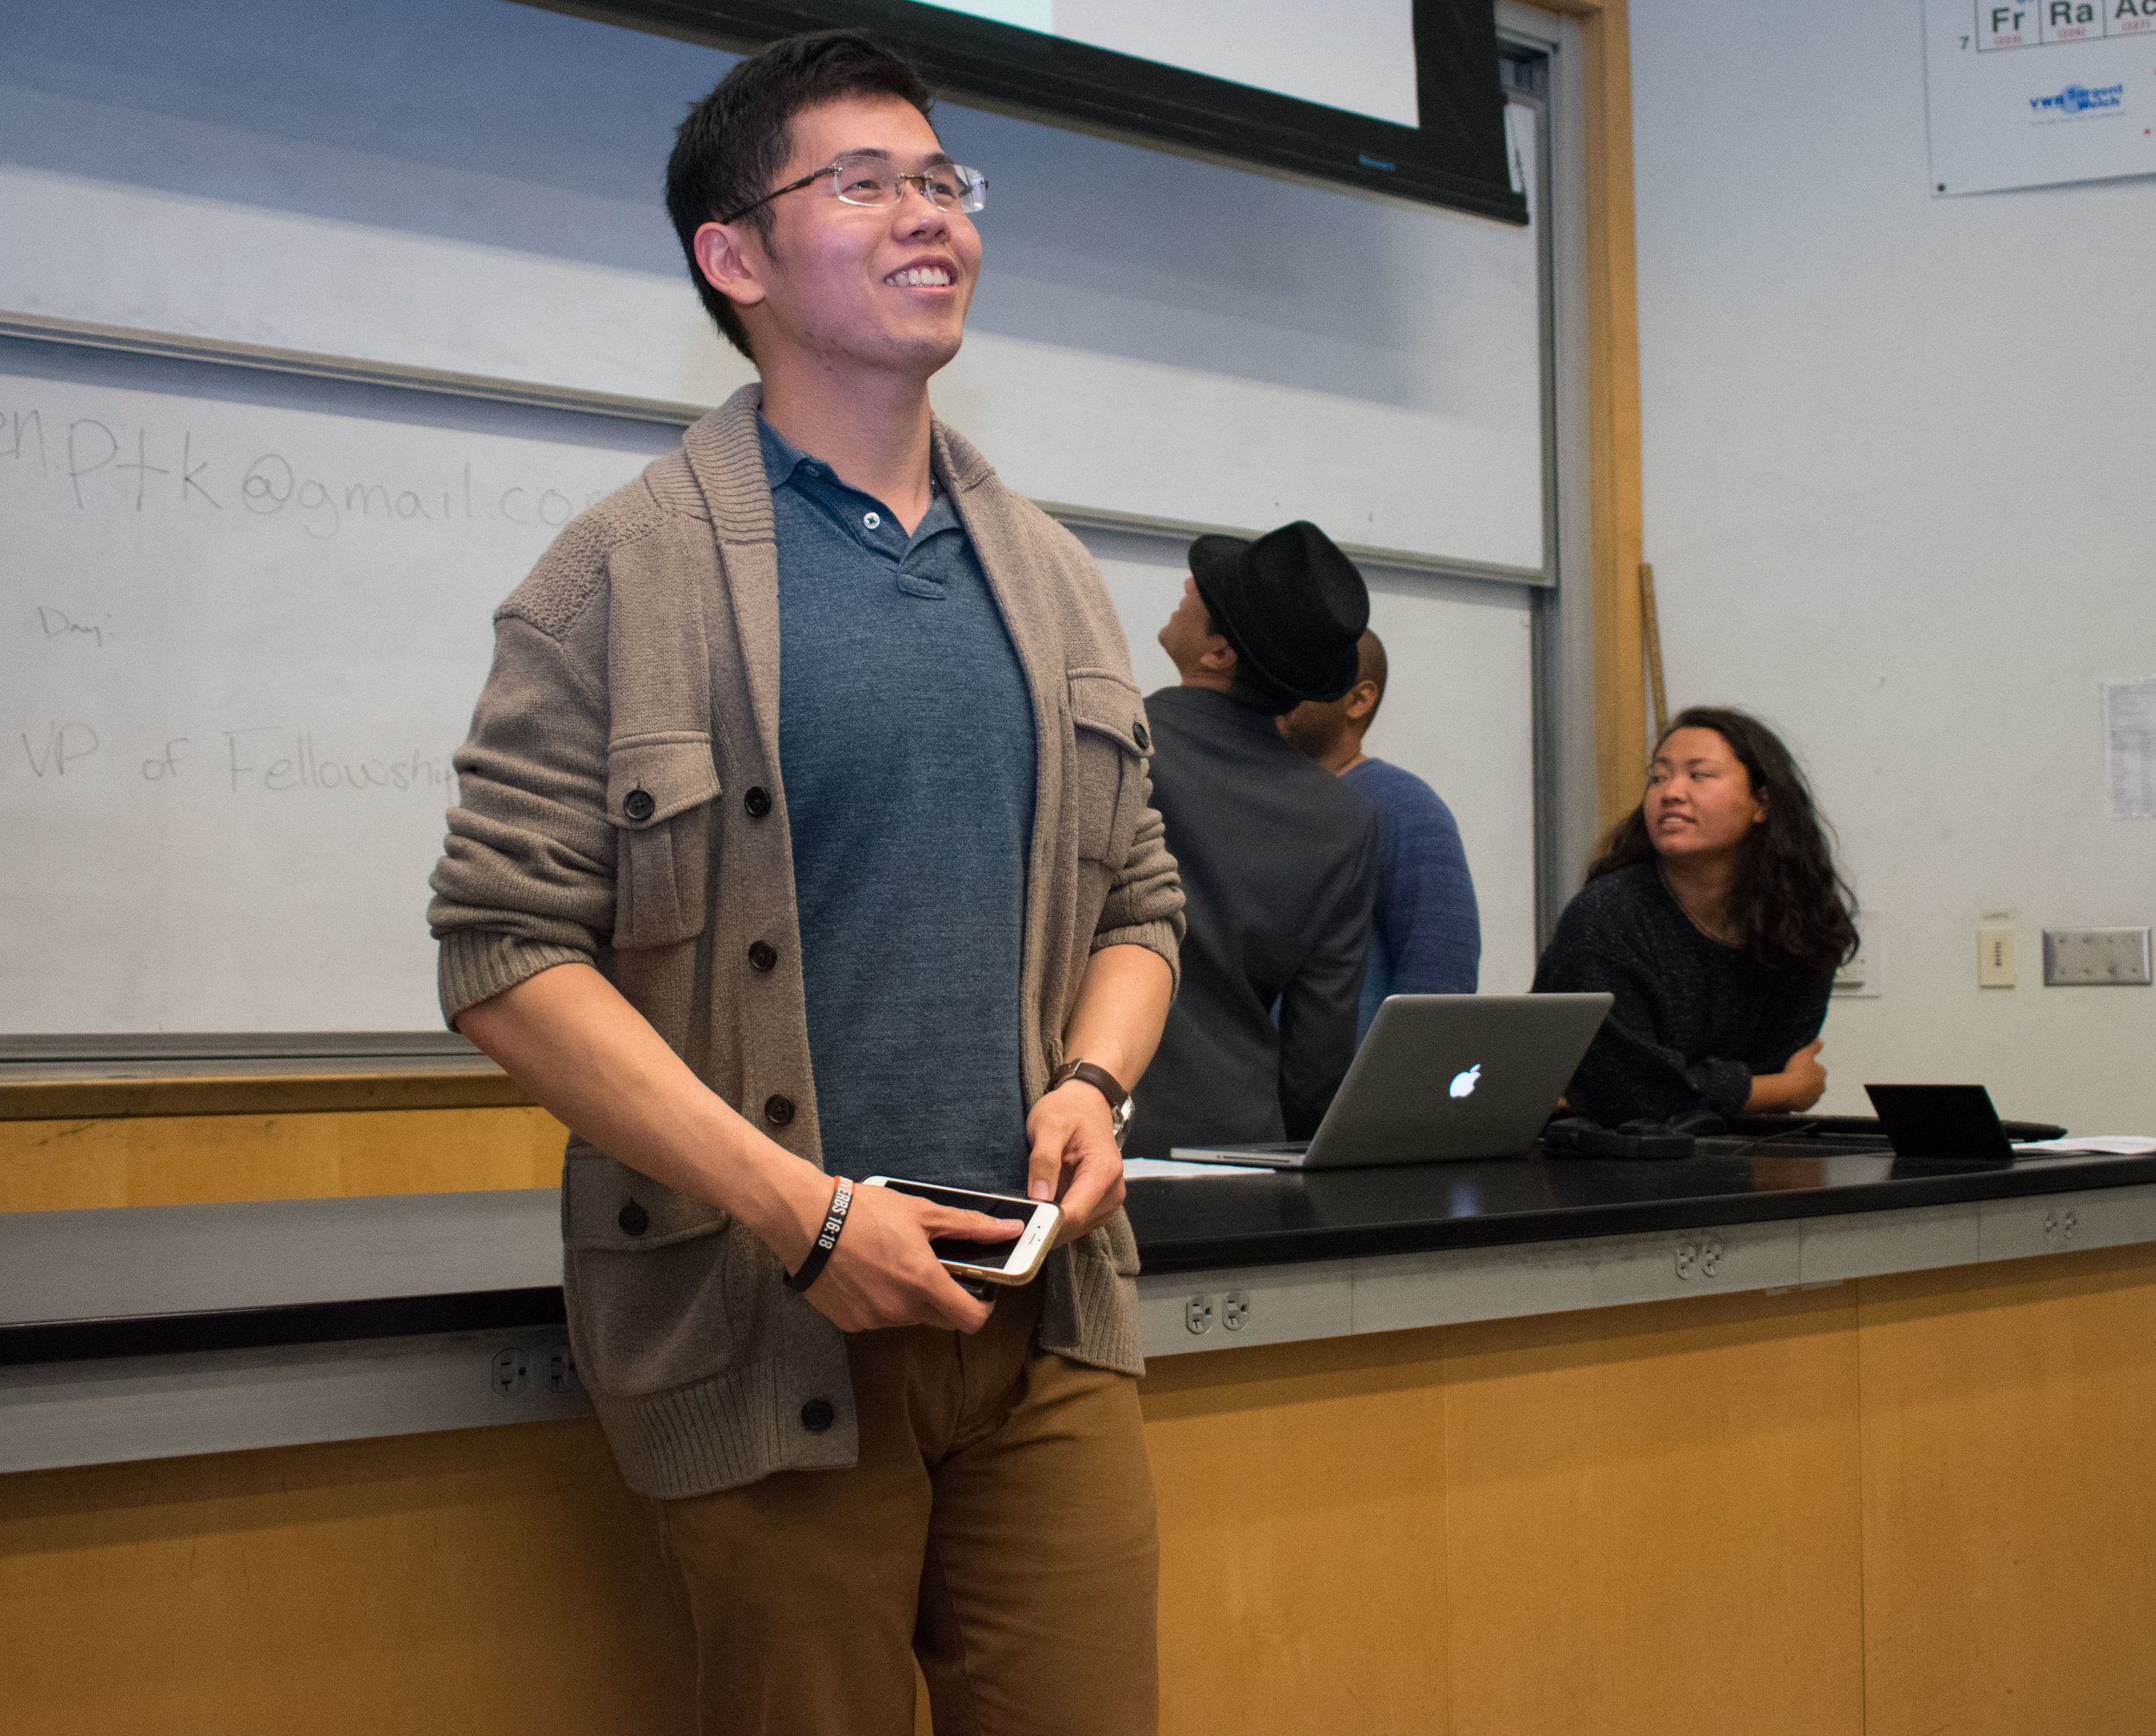  Ryan Ang, the Executive Vice President for Phi Theta Kappa, an honor society at Santa Monica College leads the weekly meeting in the Science building, room 140 at 11:15 a.m. on Tuesday, March 20 in Santa Monica, California. Students wishing to join 